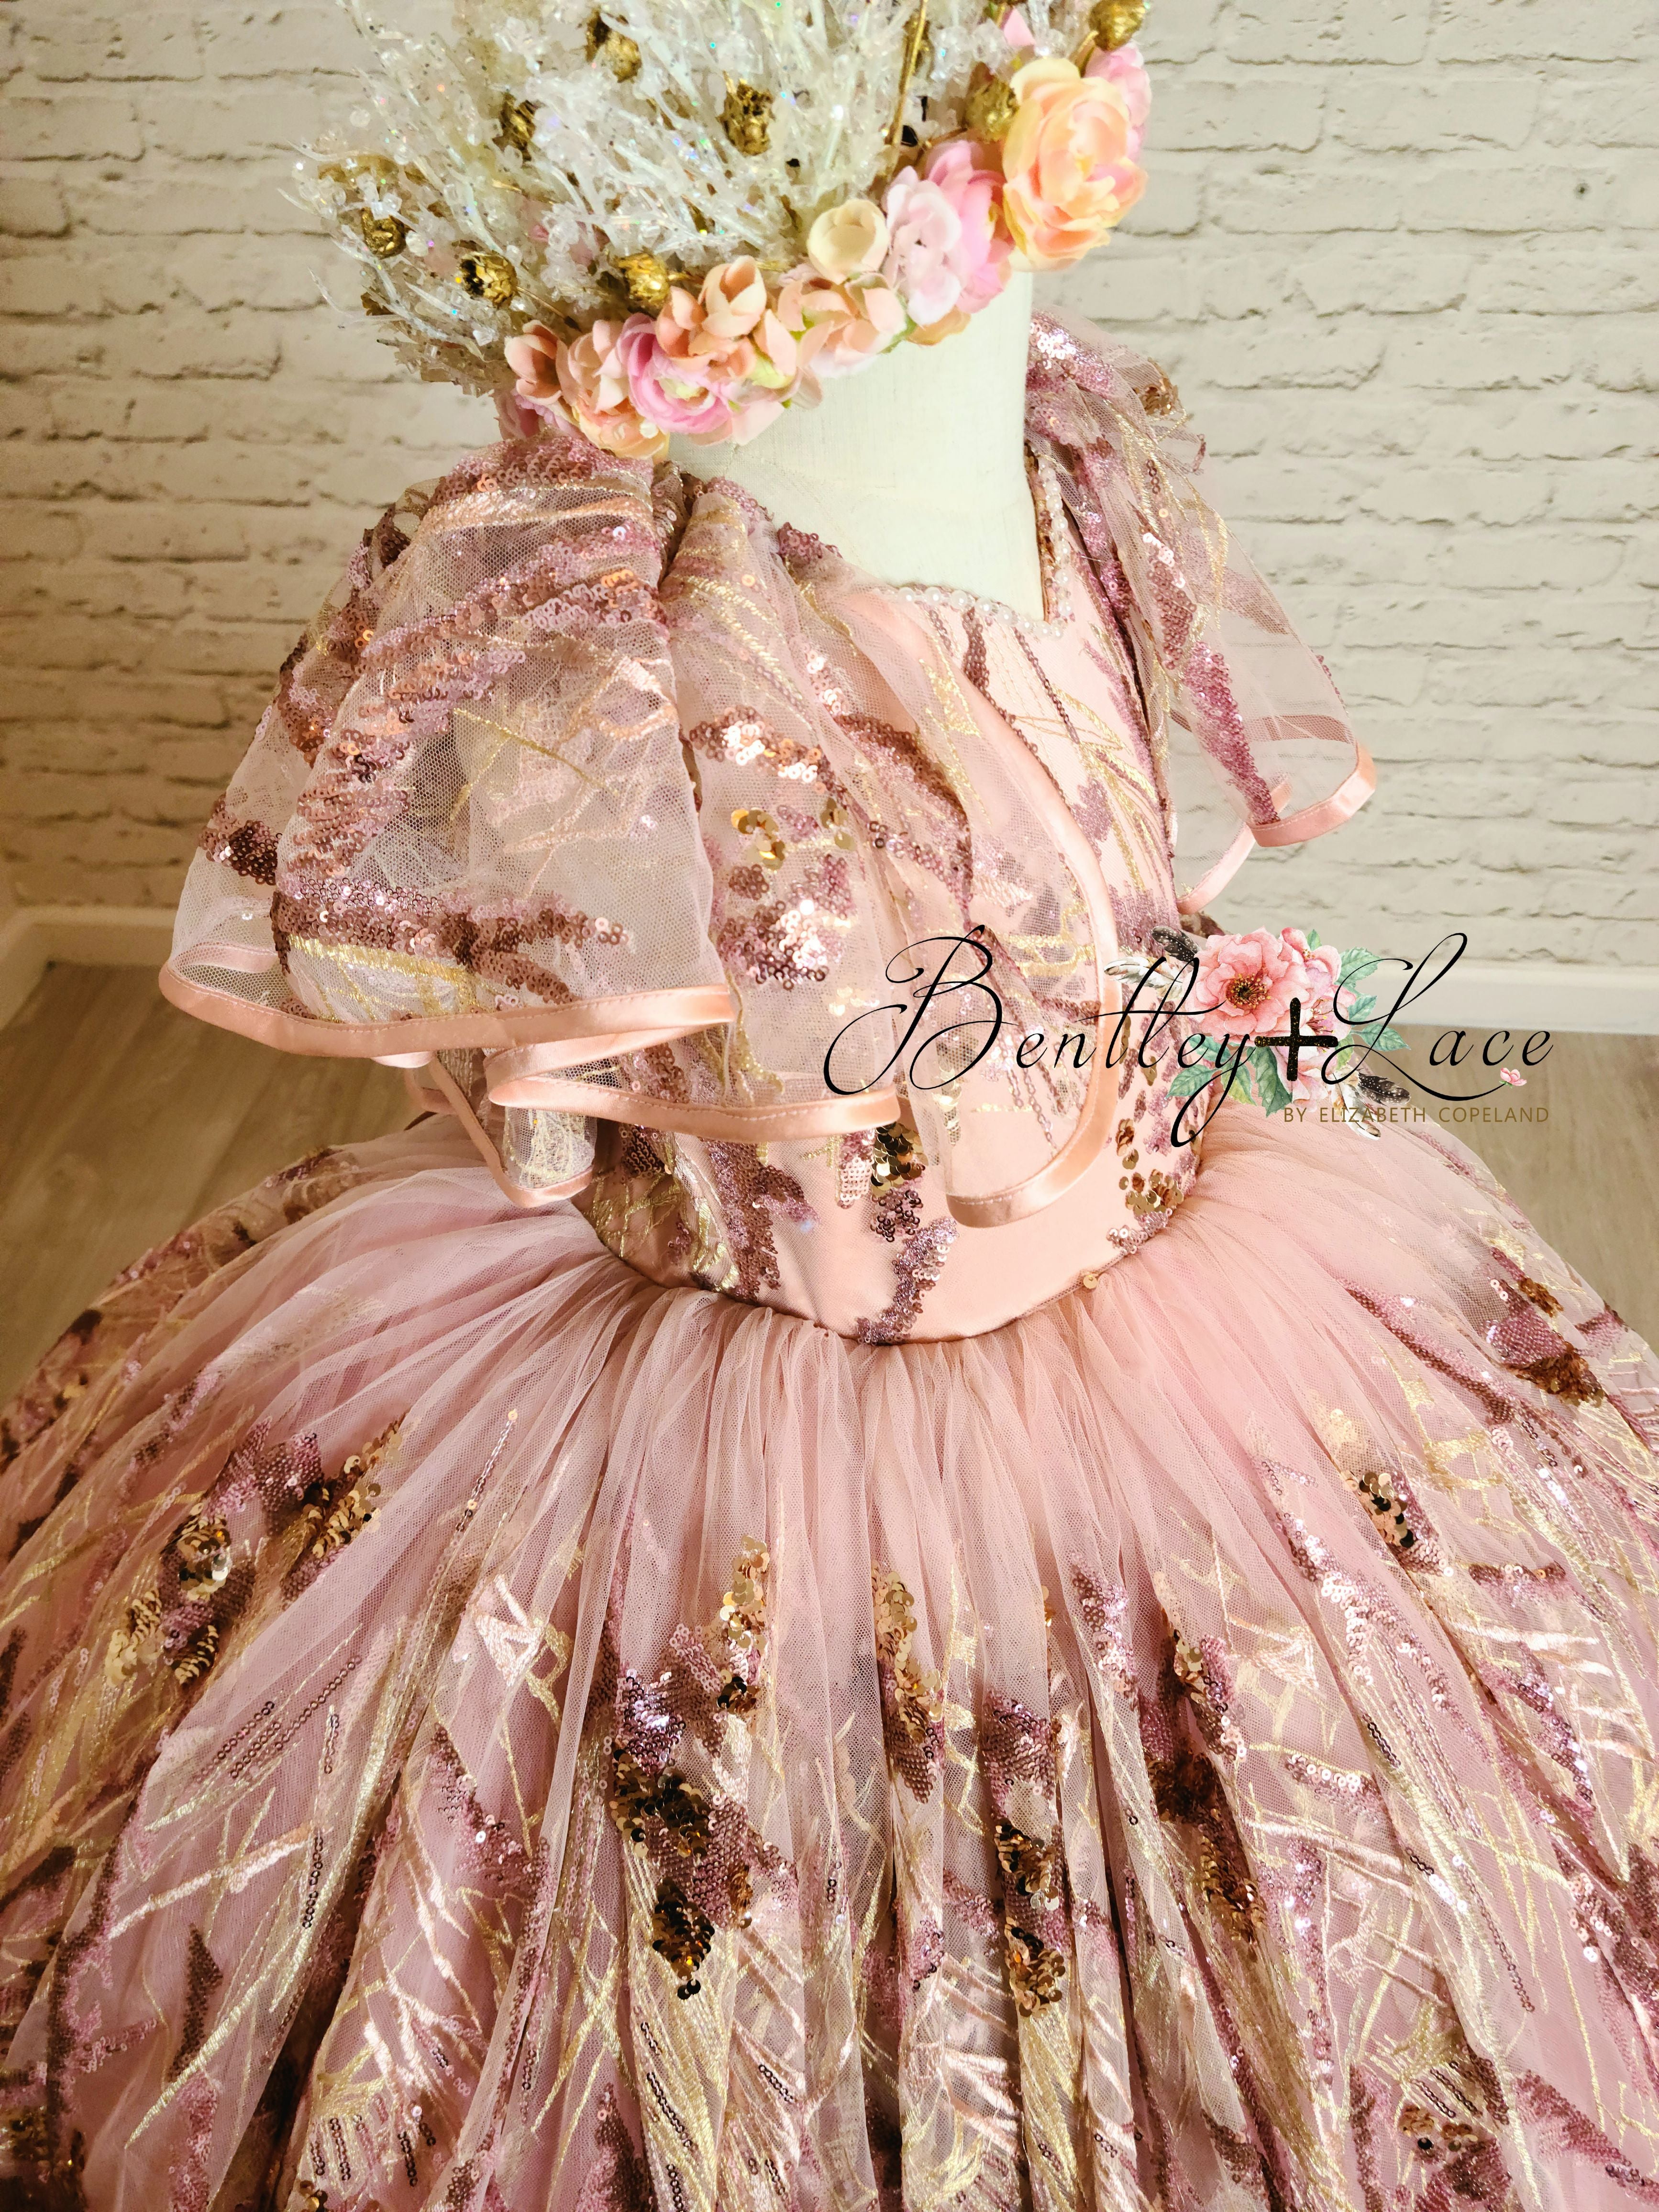 Retired rental - used condition,  no major defects. Sloane- Beautiful blush and sequin gown- Gorgeous special occasion or photo shoot dress (5 Year-Petite 8 Year)